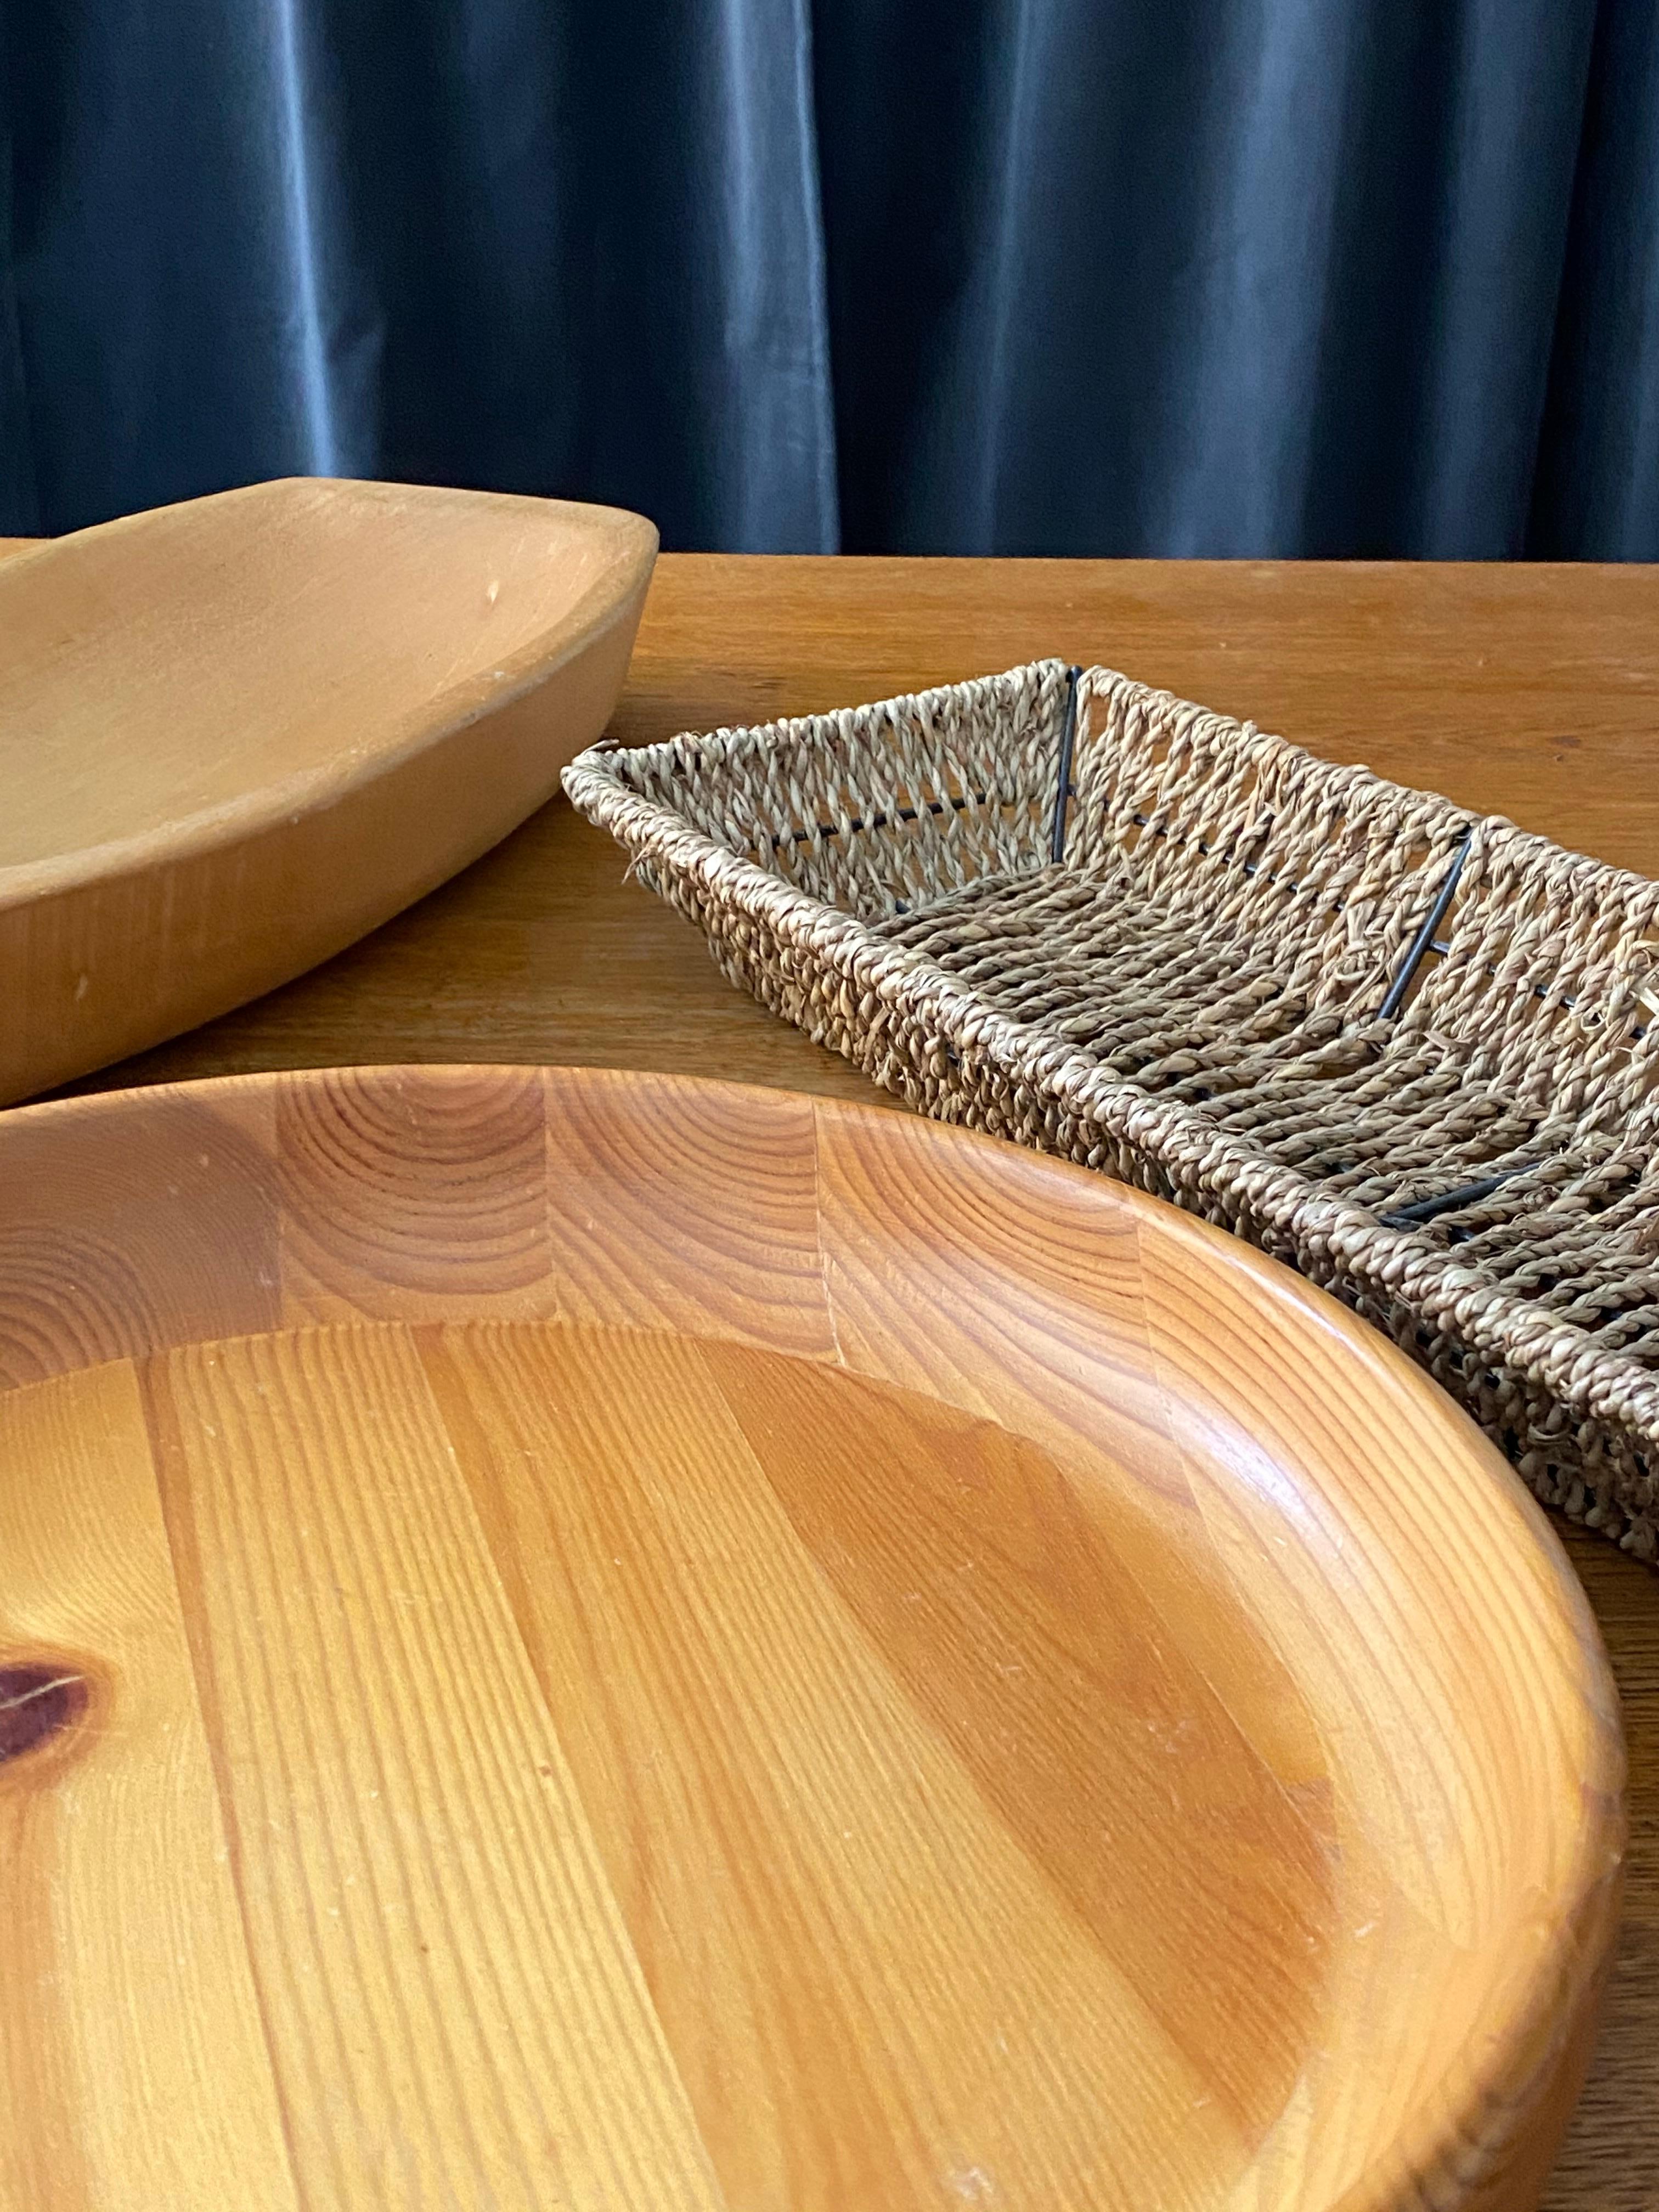 Swedish, Collection of Bowls, Dishes, Trays, Wood, Rope, Rattan, Midcentury 1